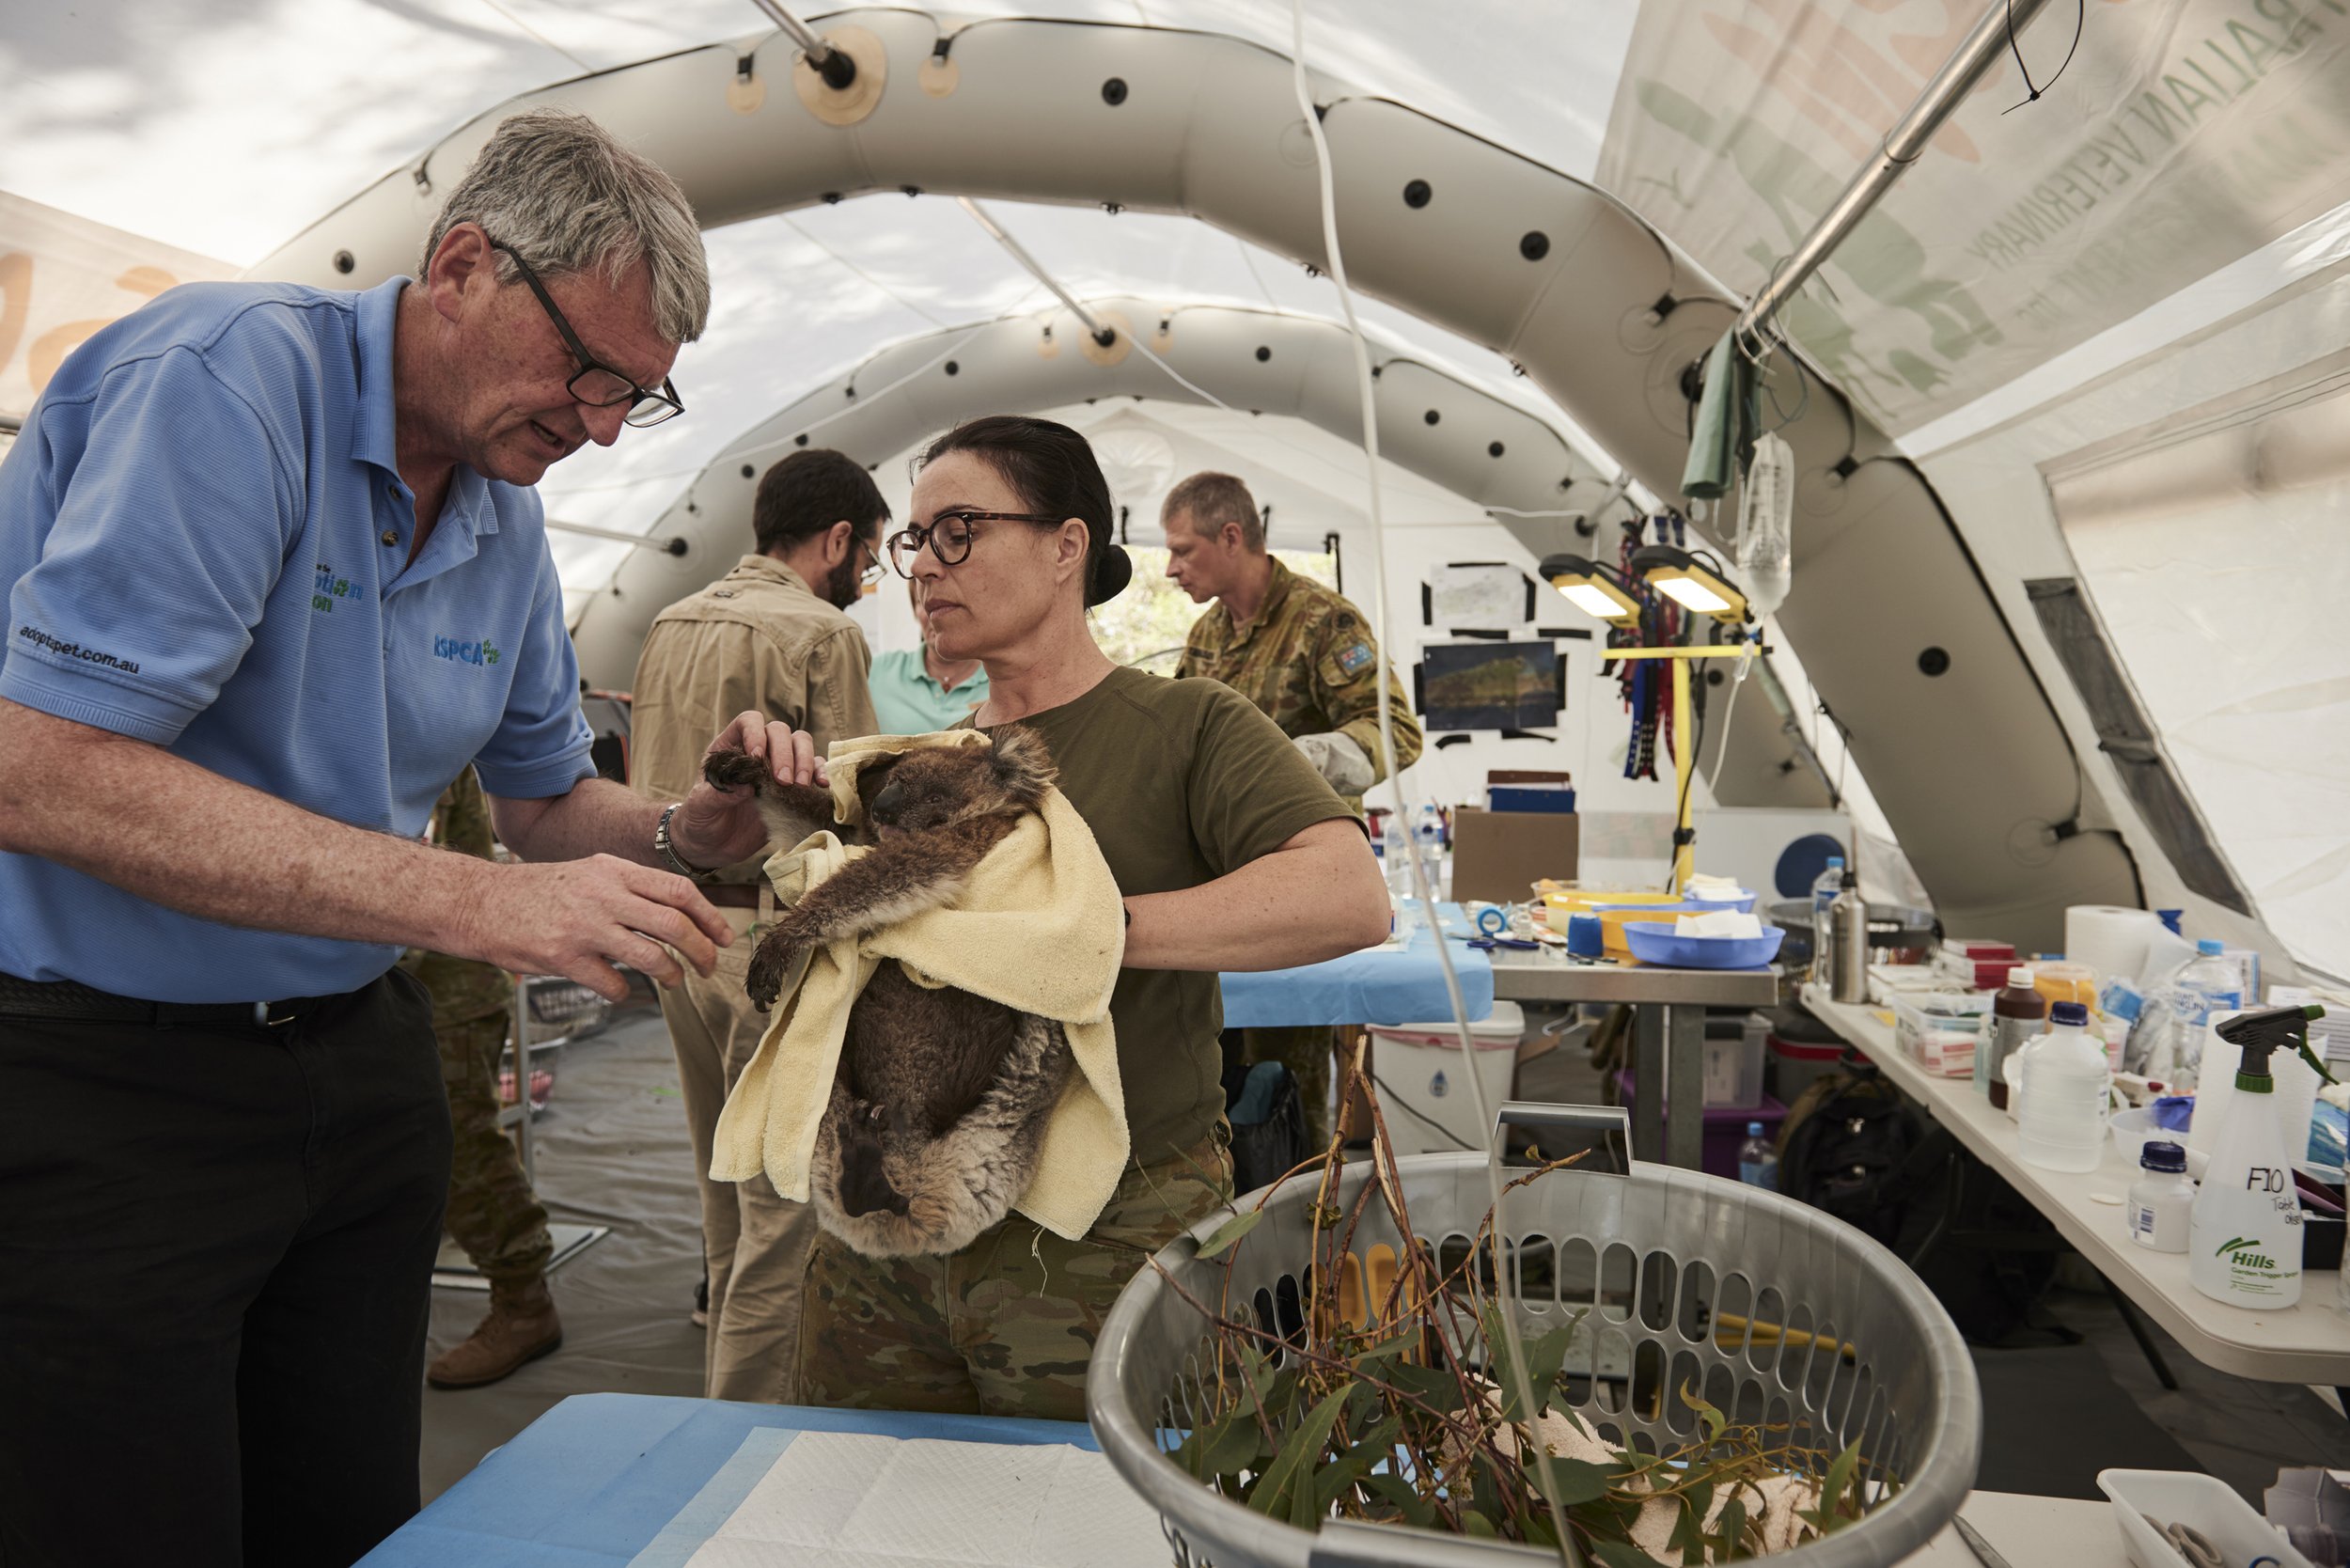  A rescued young Koala is held by Australian Defence Force Lt Susie Rattigan while RSPCA volunteer Brad Ward inspects the Koala for injury in a makeshift triage tent at Kangaroo Island Wildlife Park &amp; Aquarium on the 15th of January 2020   